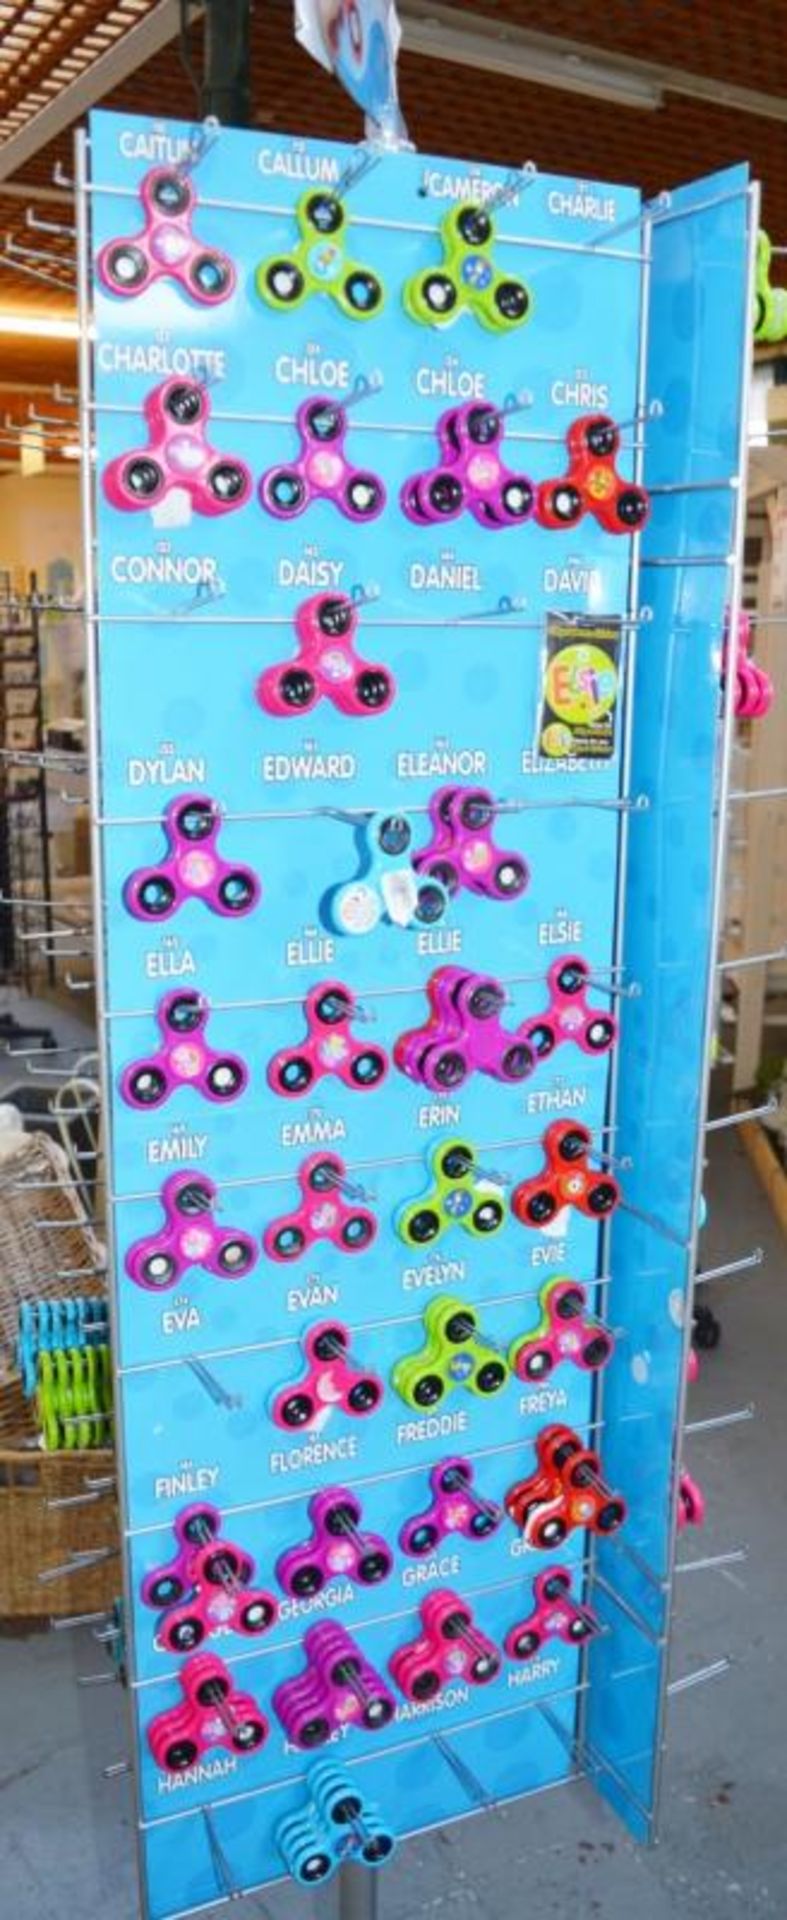 1 x Retail Carousel Display Stand With Approx 130 x Personalised Fidget Spinners - Unused Stock - Re - Image 3 of 5